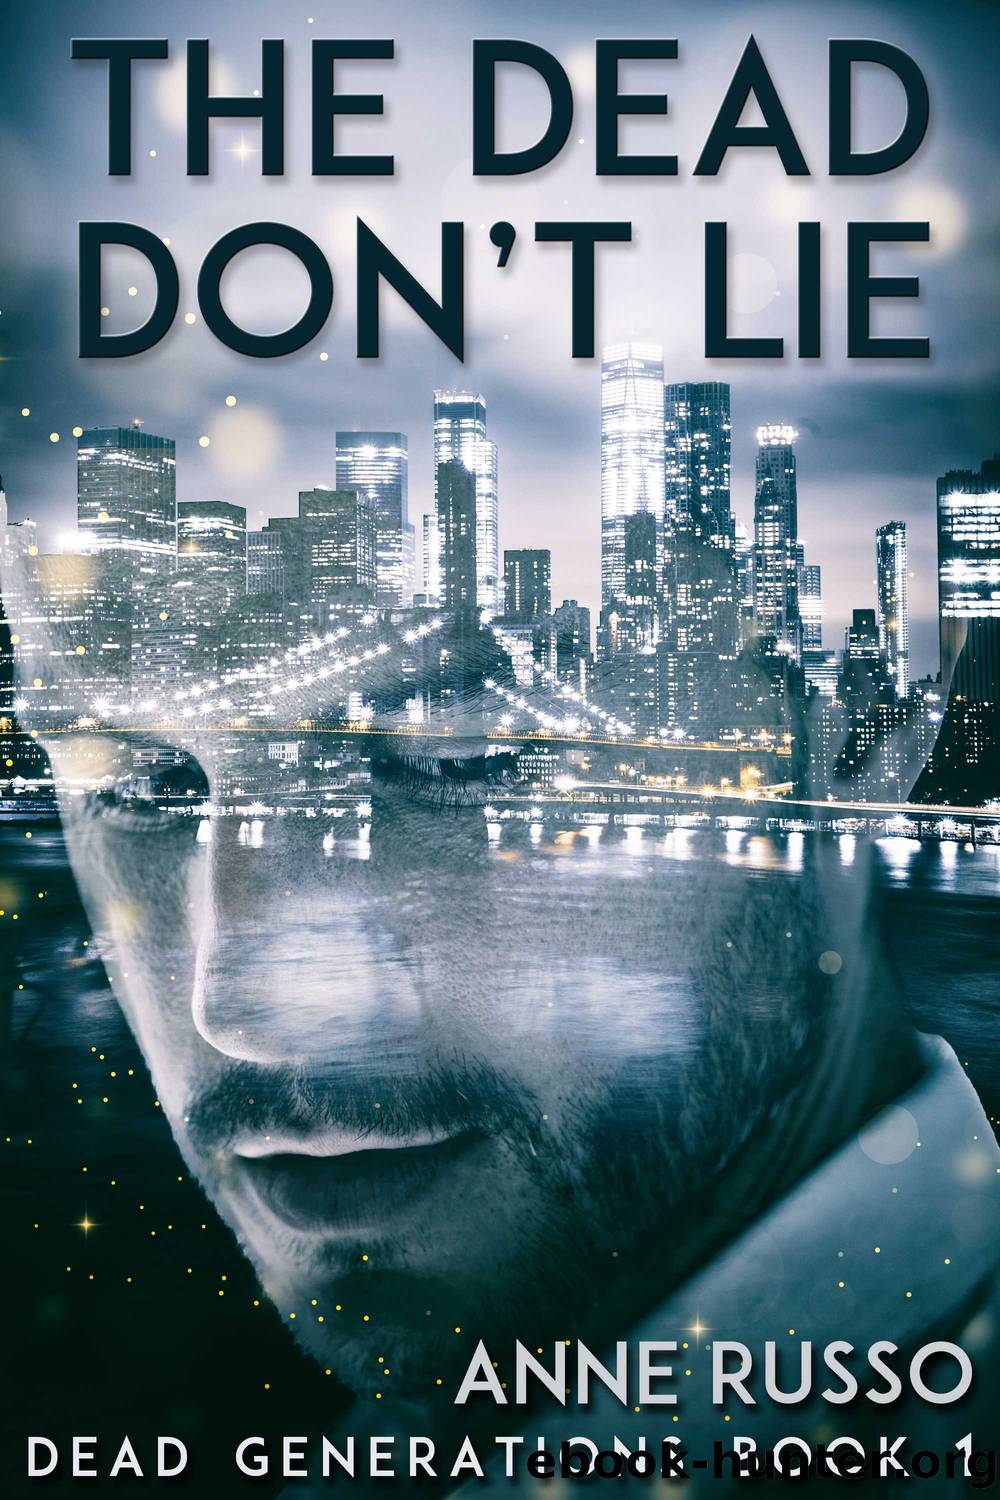 The Dead Don't Lie by Anne Russo